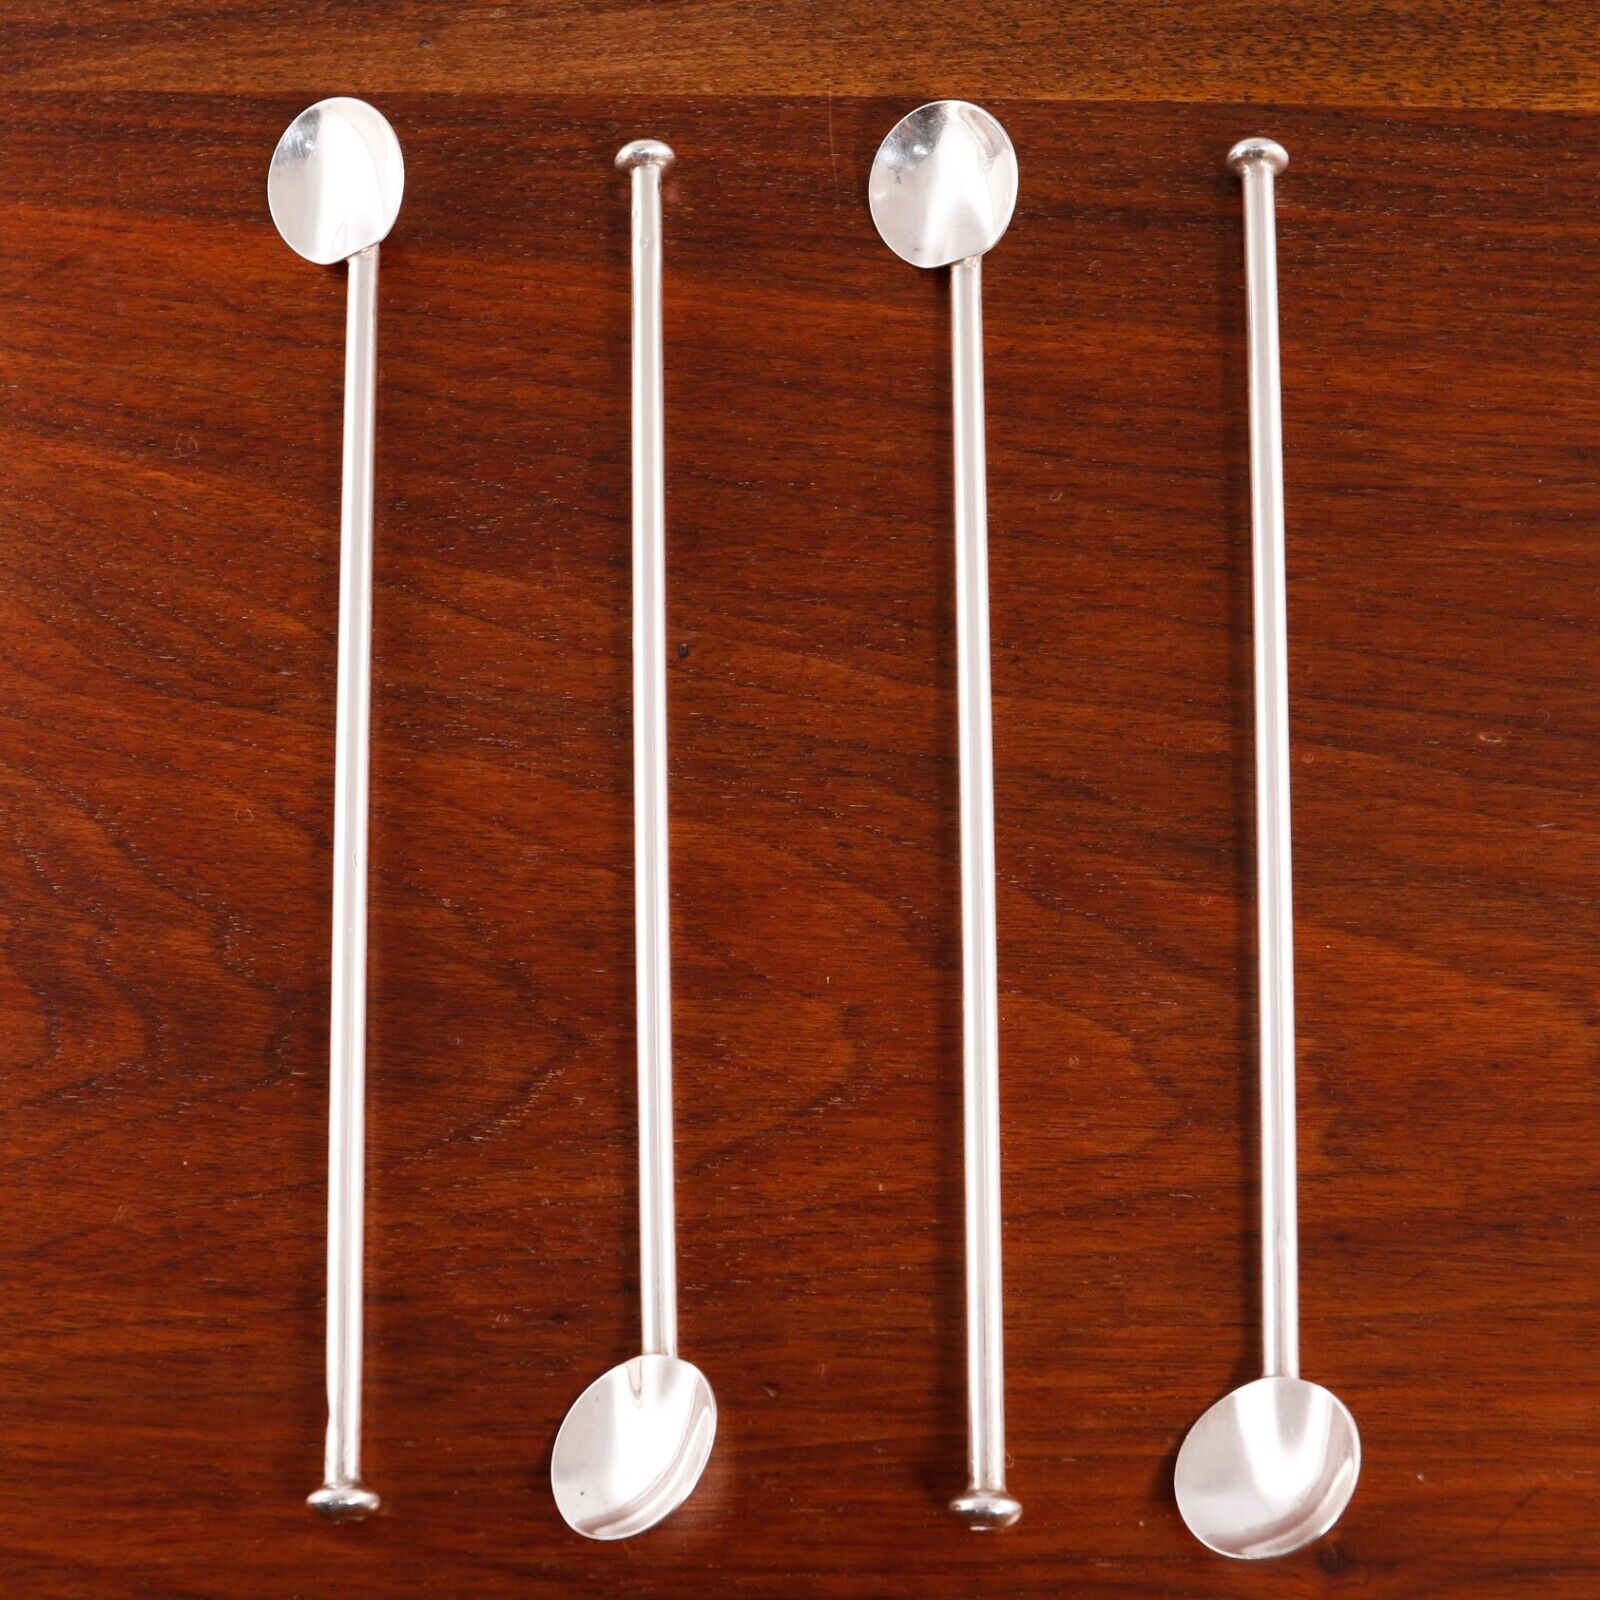 4 MEXICAN STERLING SILVER SIPPER STRAW SPOONS CIRCULAR BOWLS STURDY NO MONO